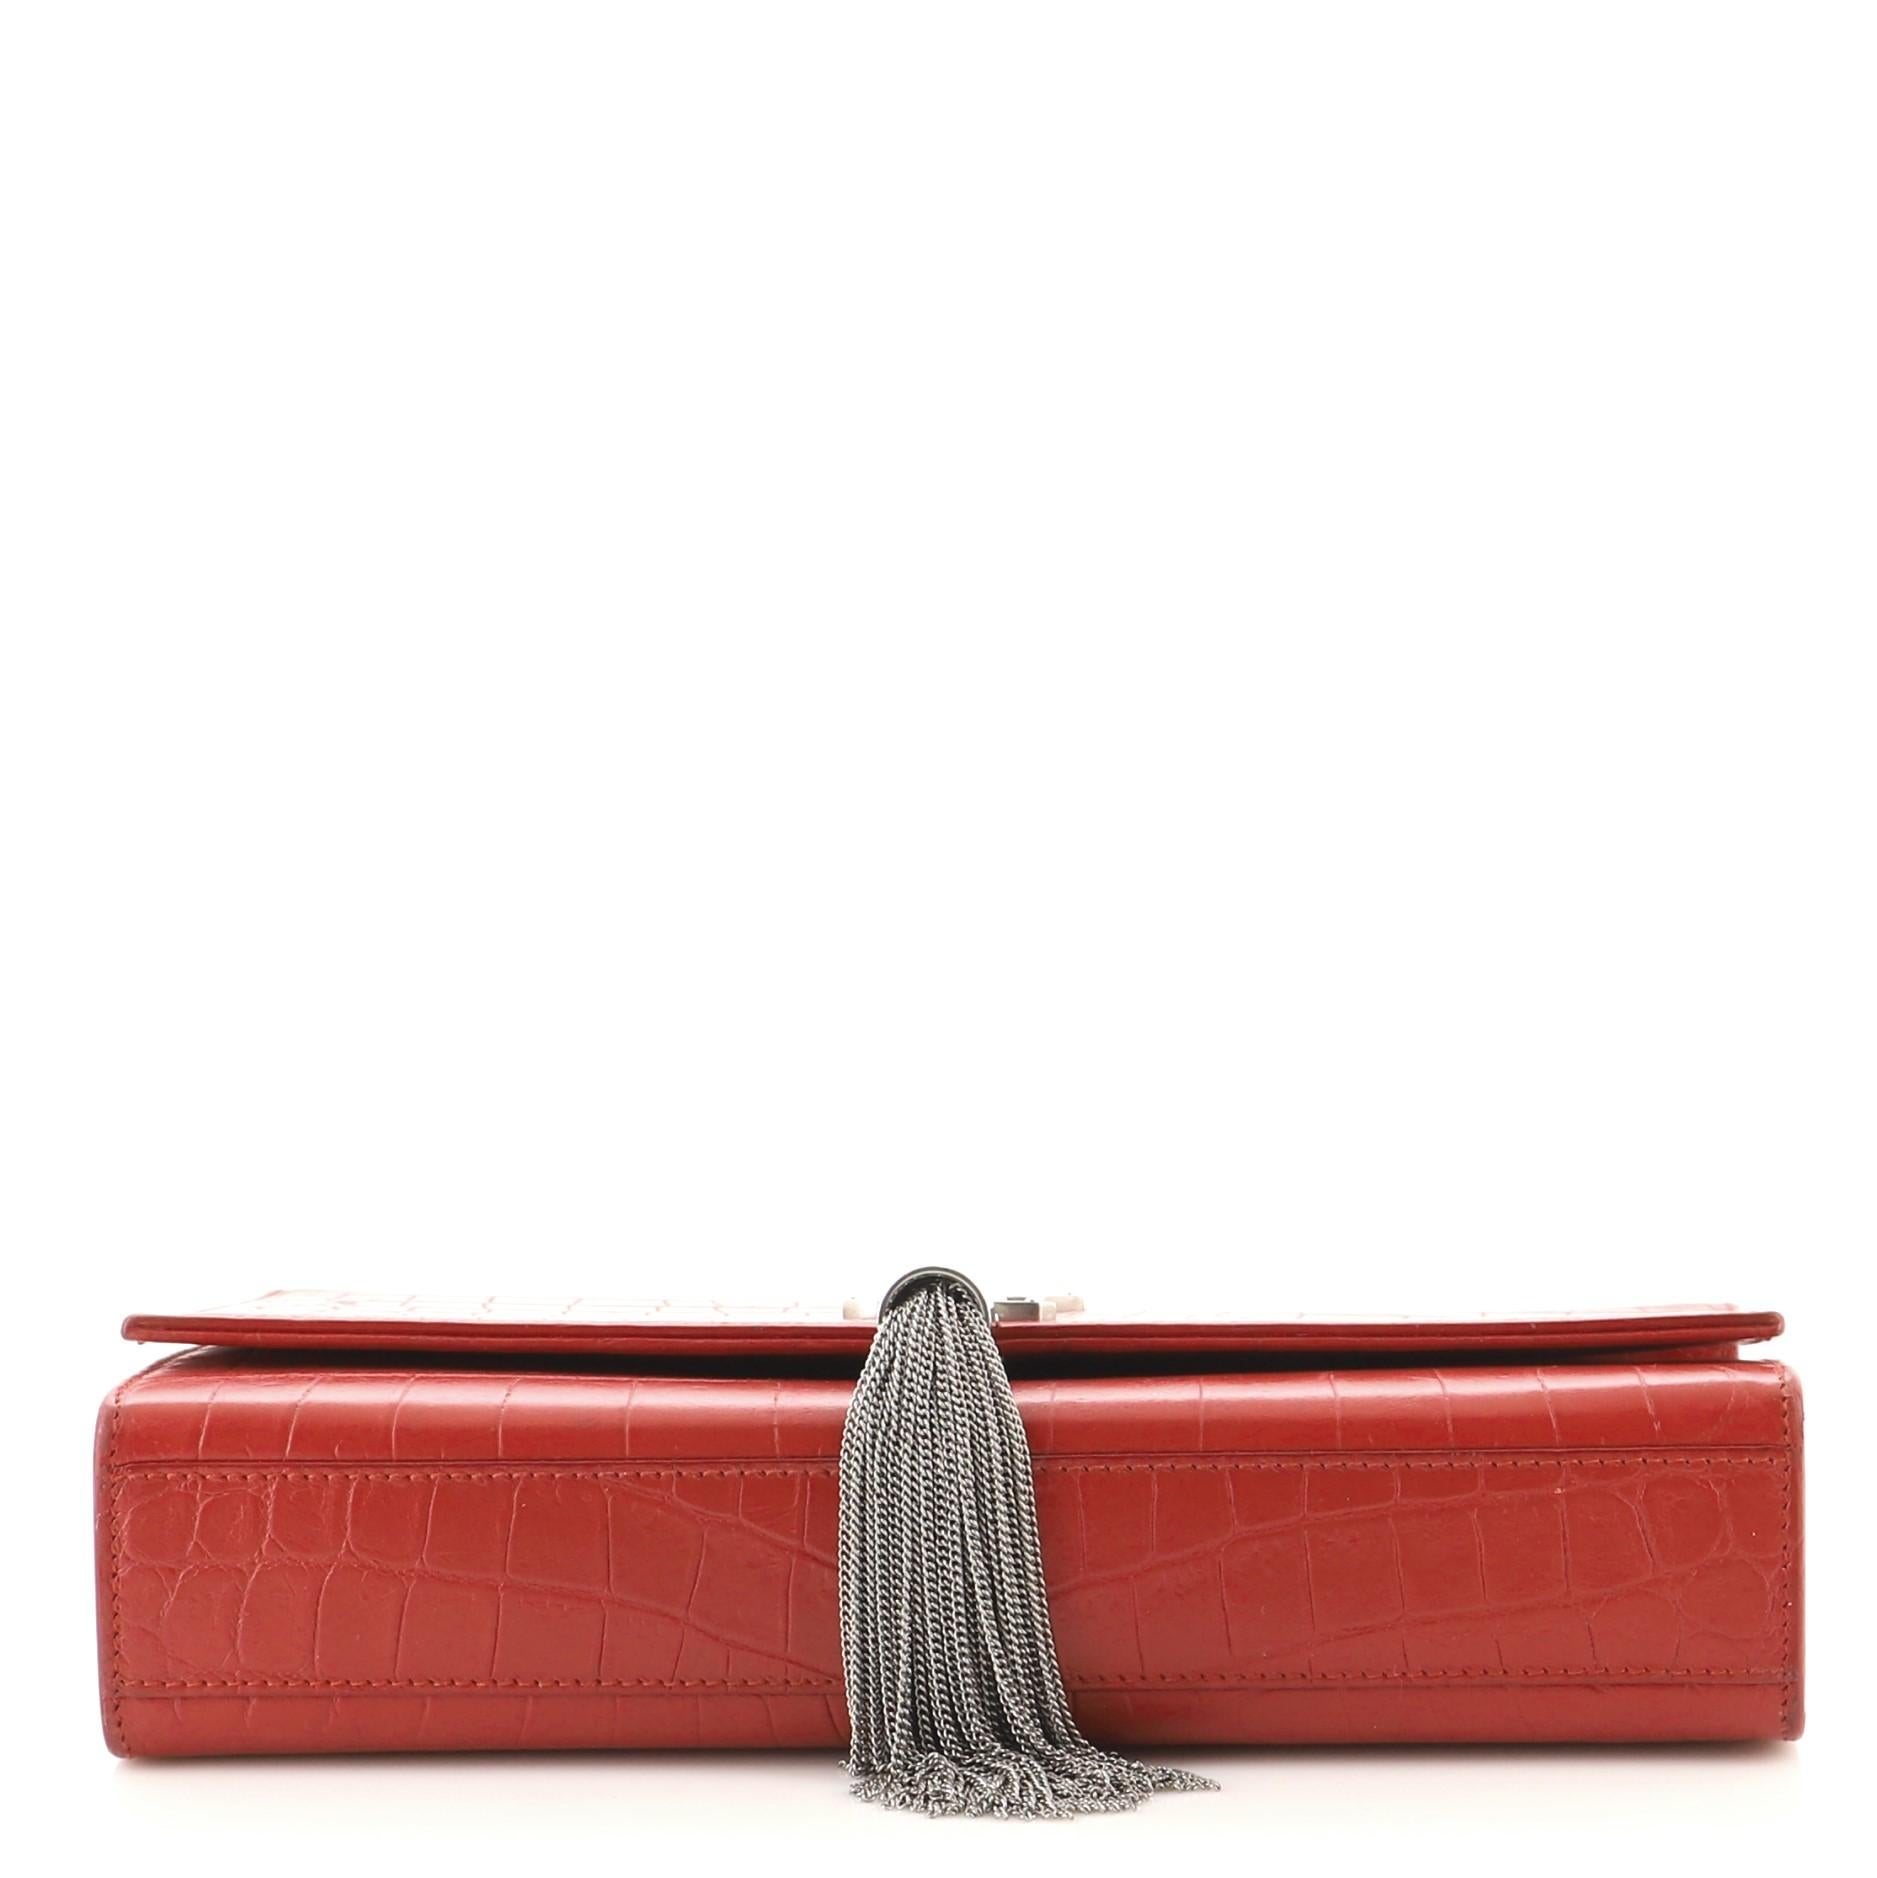 ysl red bag silver chain